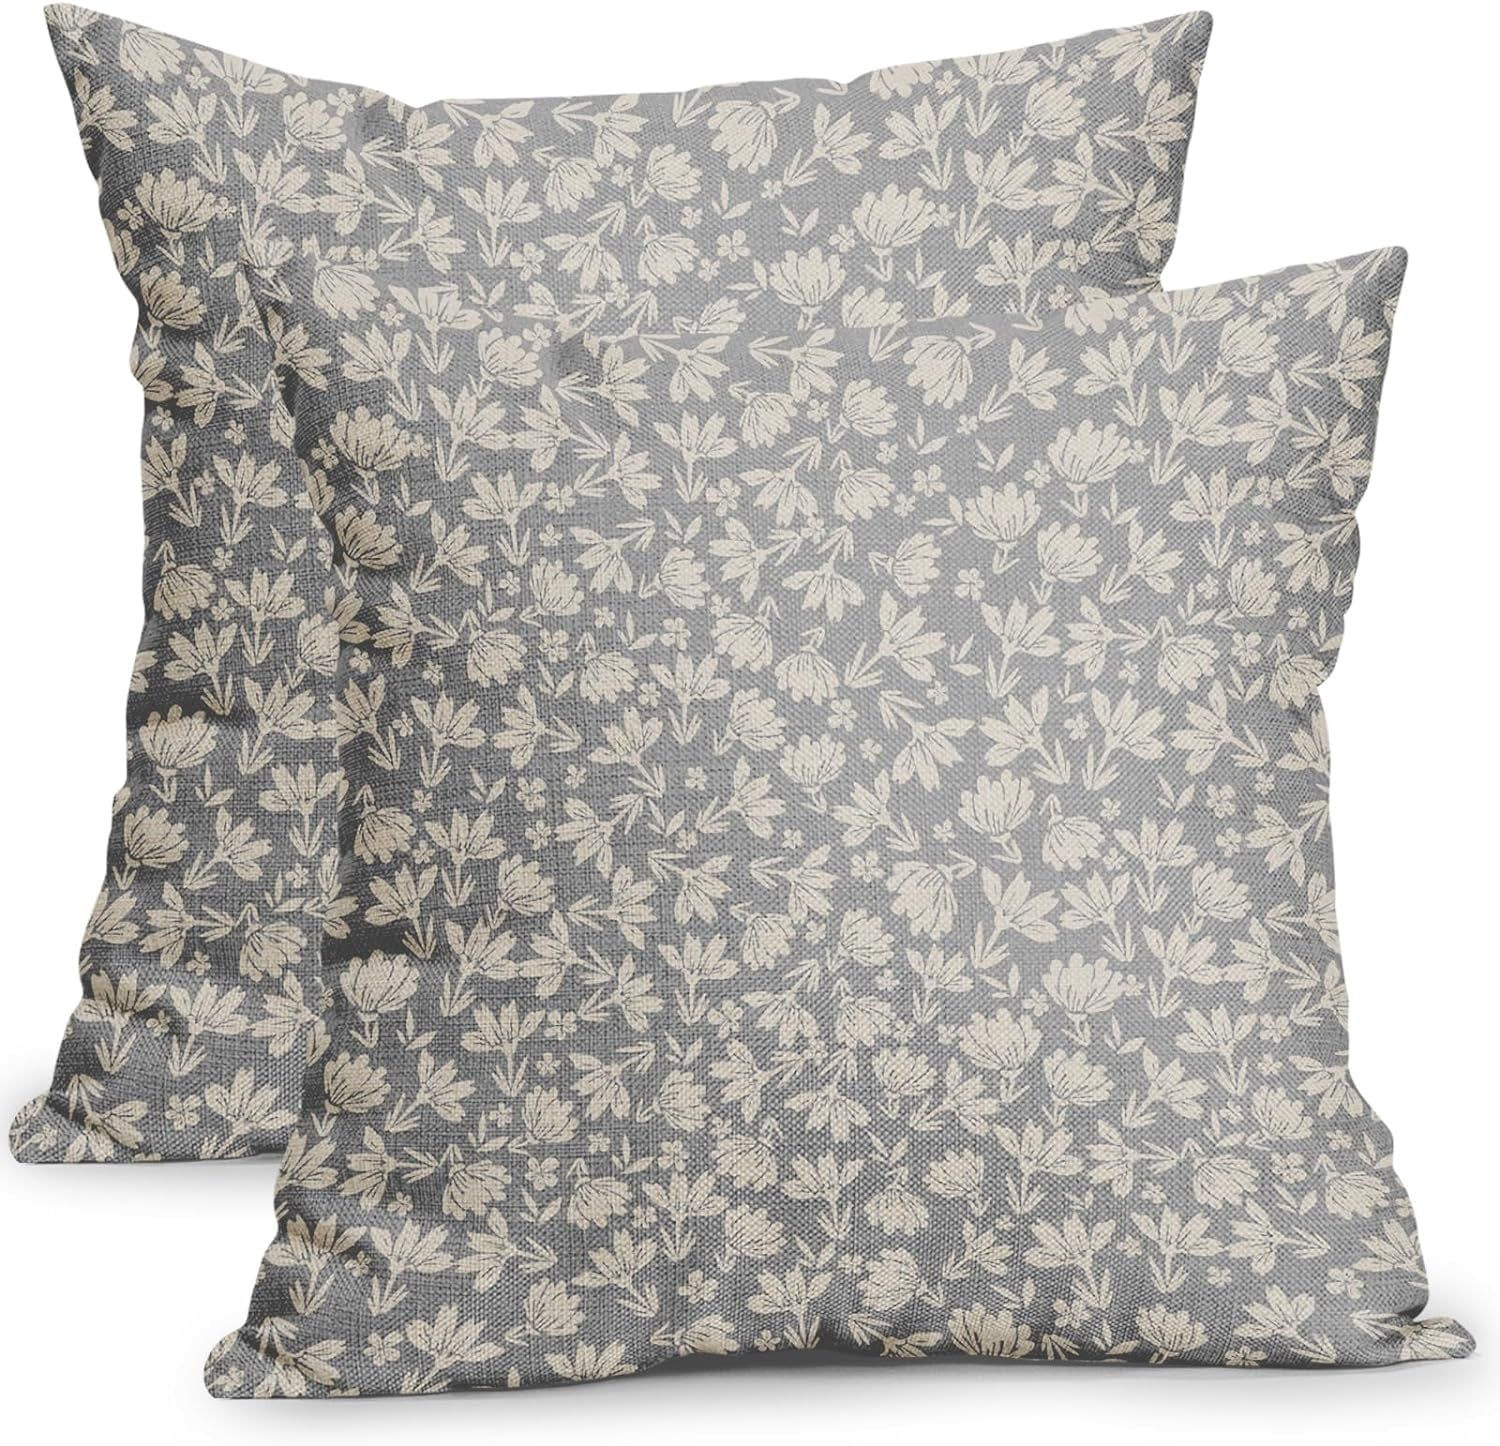 Grey and Cream Floral Pillow Covers 20x20 Inch Set of 2 Vintage Rustic Flower Outdoor Decorative ... | Walmart (US)